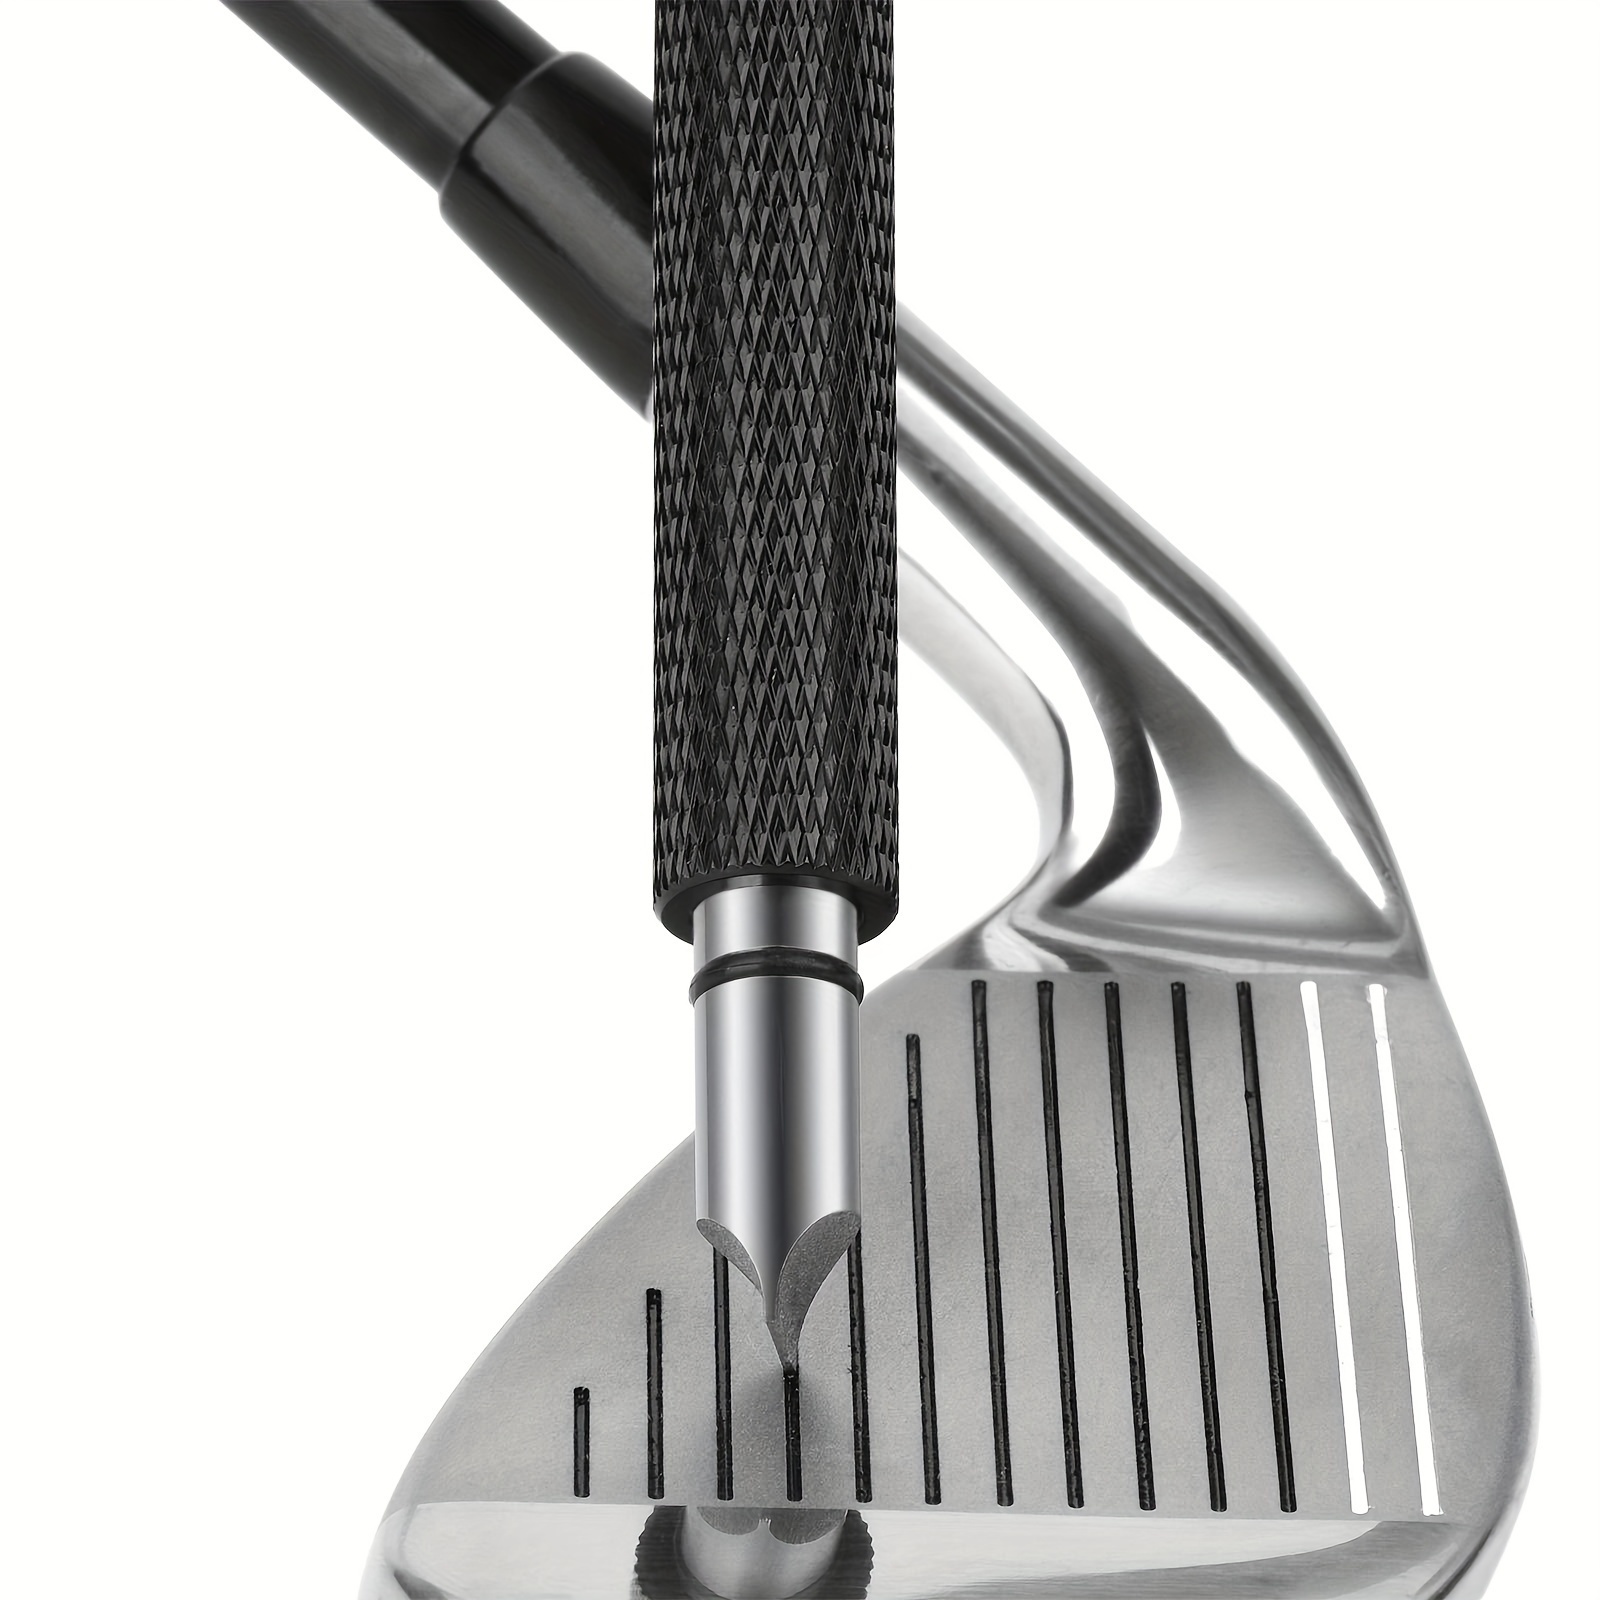 

1pc Premium Golf Club Groove Sharpener - Re-grooving Tool And Cleaner For Wedges And Irons - Enhance Spin And Control For Better Shots